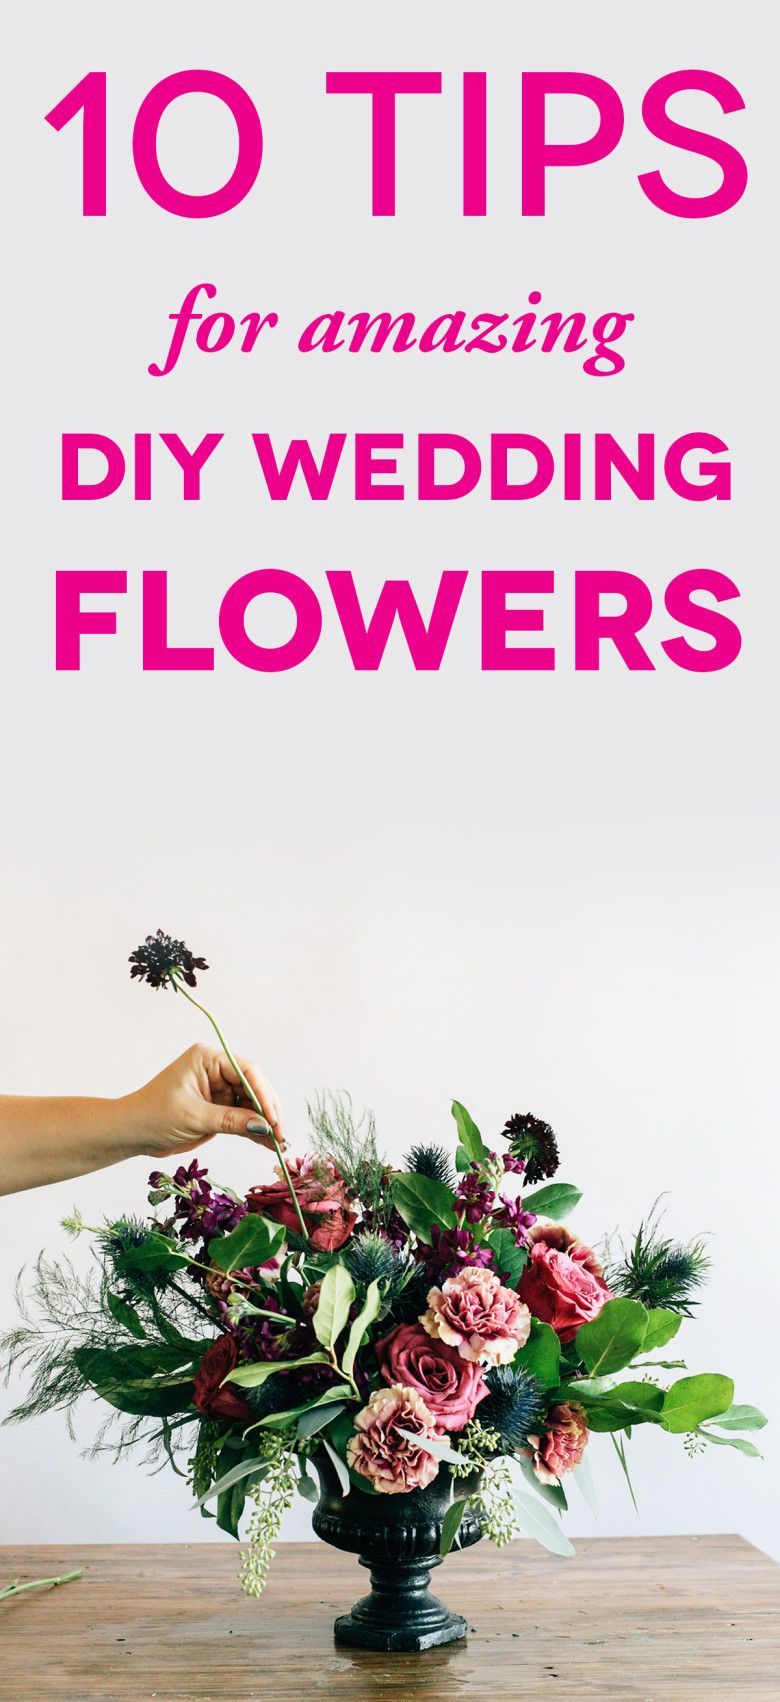 DIY Wedding Flowers: 10 Tips To Save You Stress | A Practical Wedding - DIY Wedding Flowers: 10 Tips To Save You Stress | A Practical Wedding -   19 diy Wedding flowers ideas